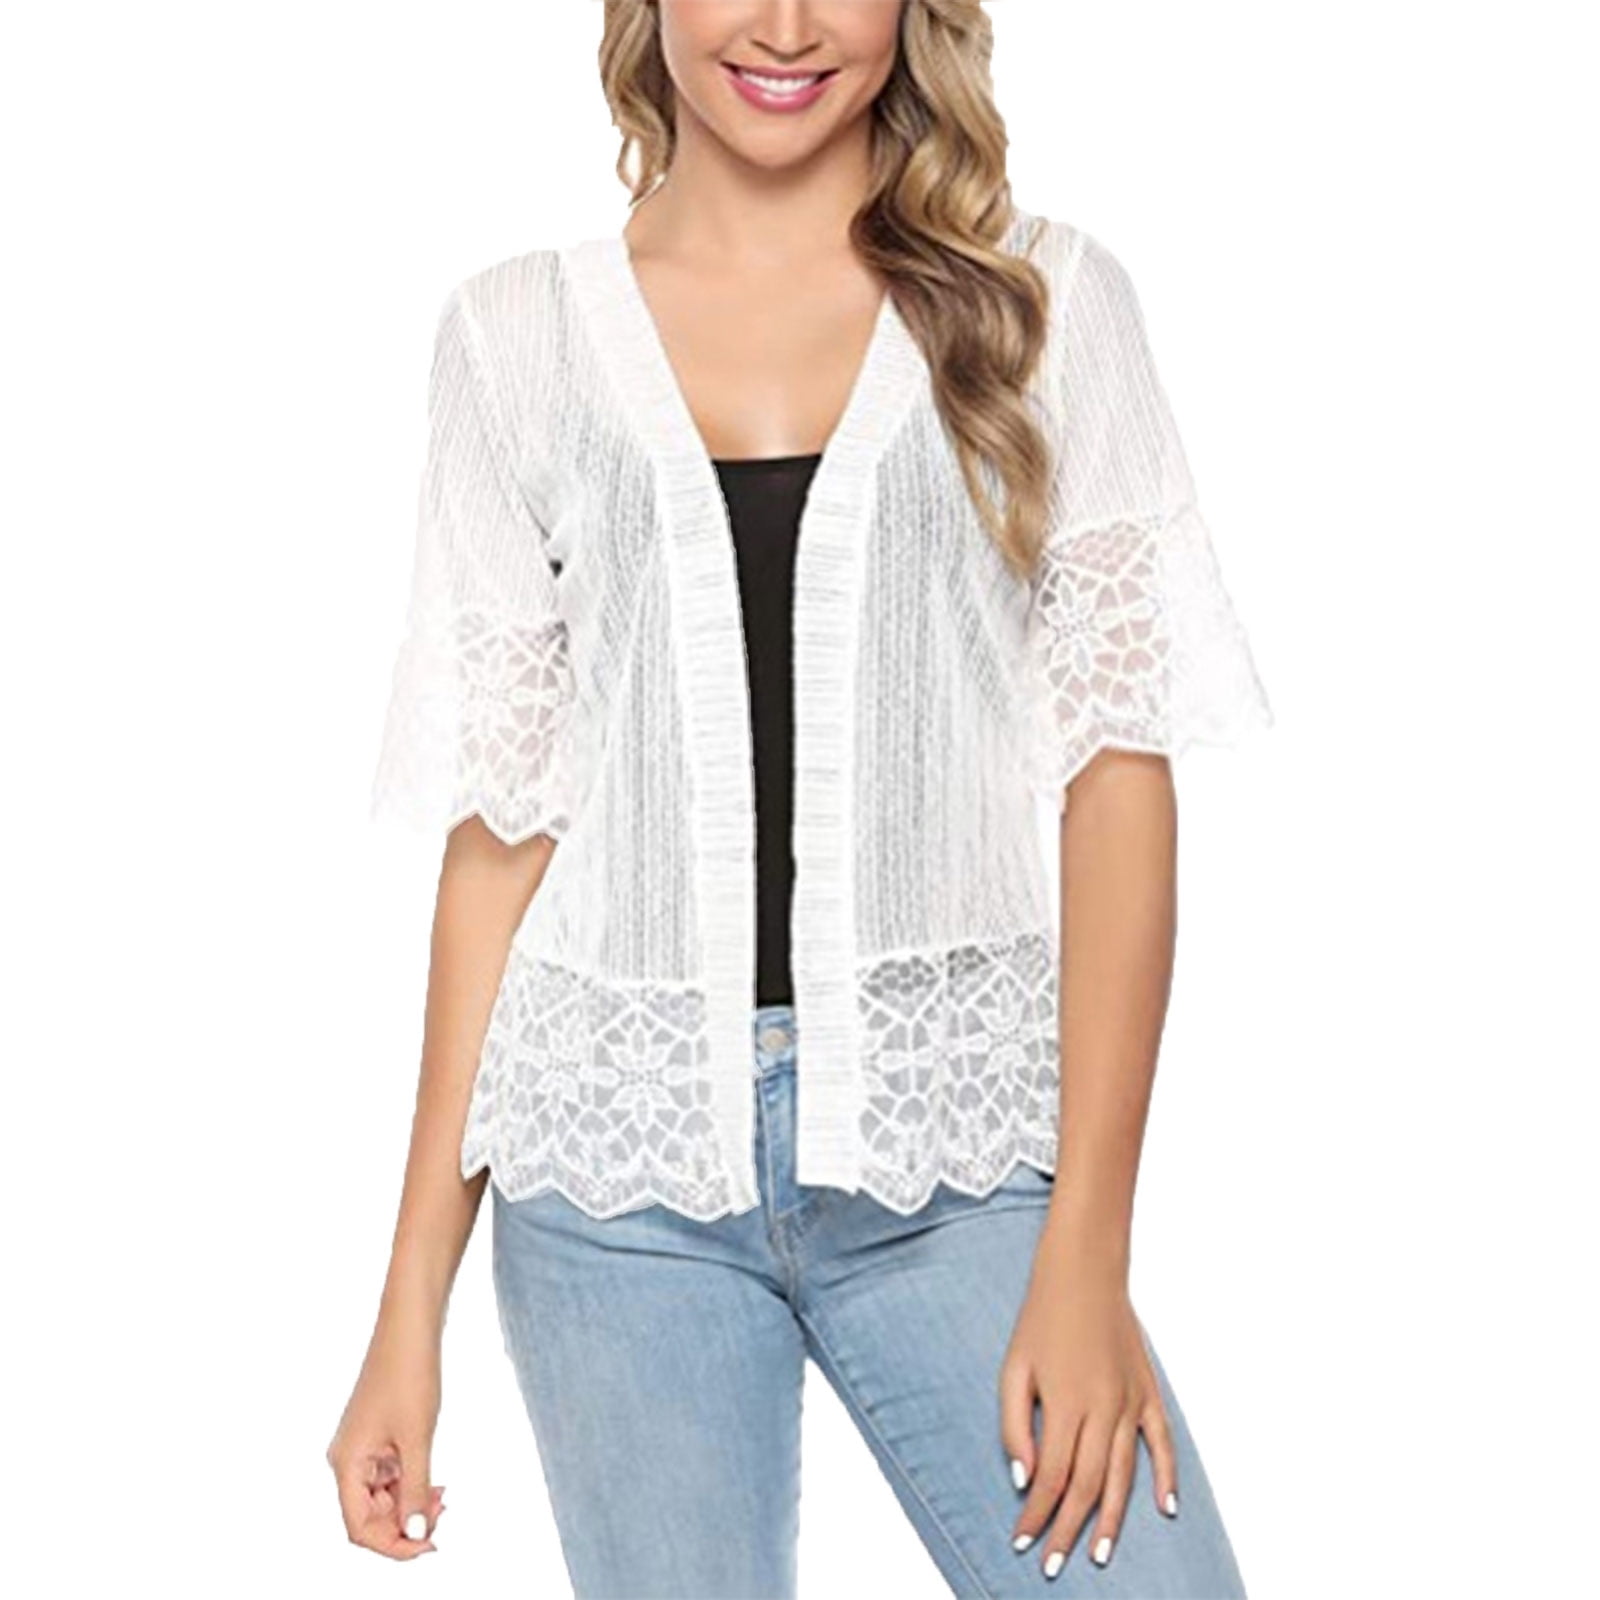 LANTIAN Women's Open Front Short Sleeve Solid Color Lace Patchwork Sheer Bolero Cover Up Shrug Cardigan